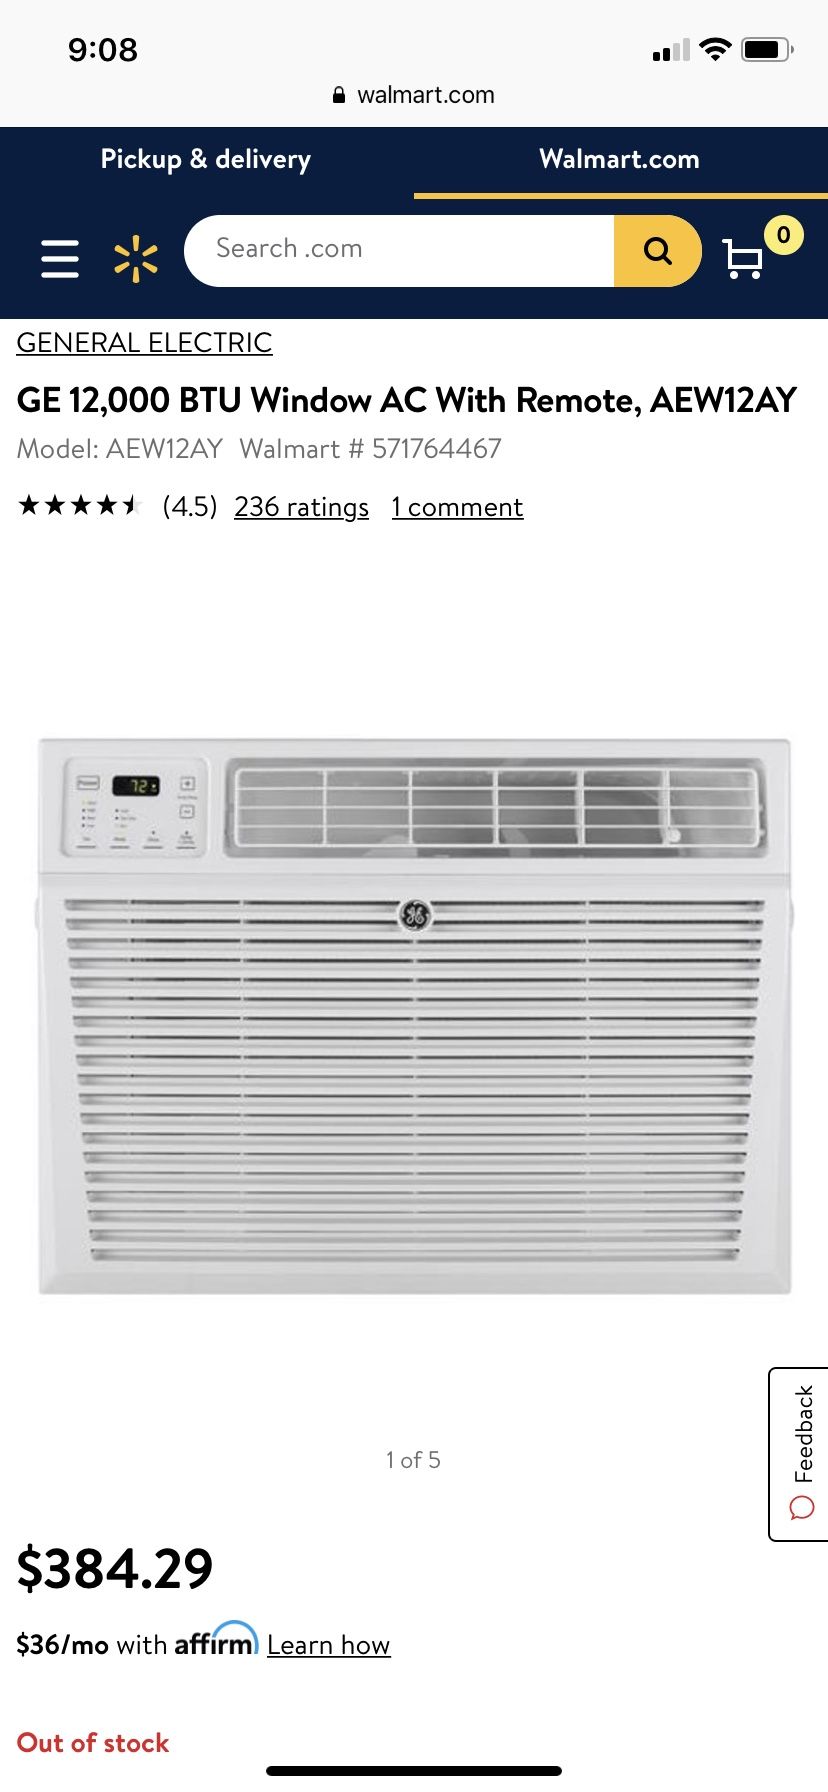 12,000 BTU GE Window AC Unit With Remote! Be Ready For Next Summer!